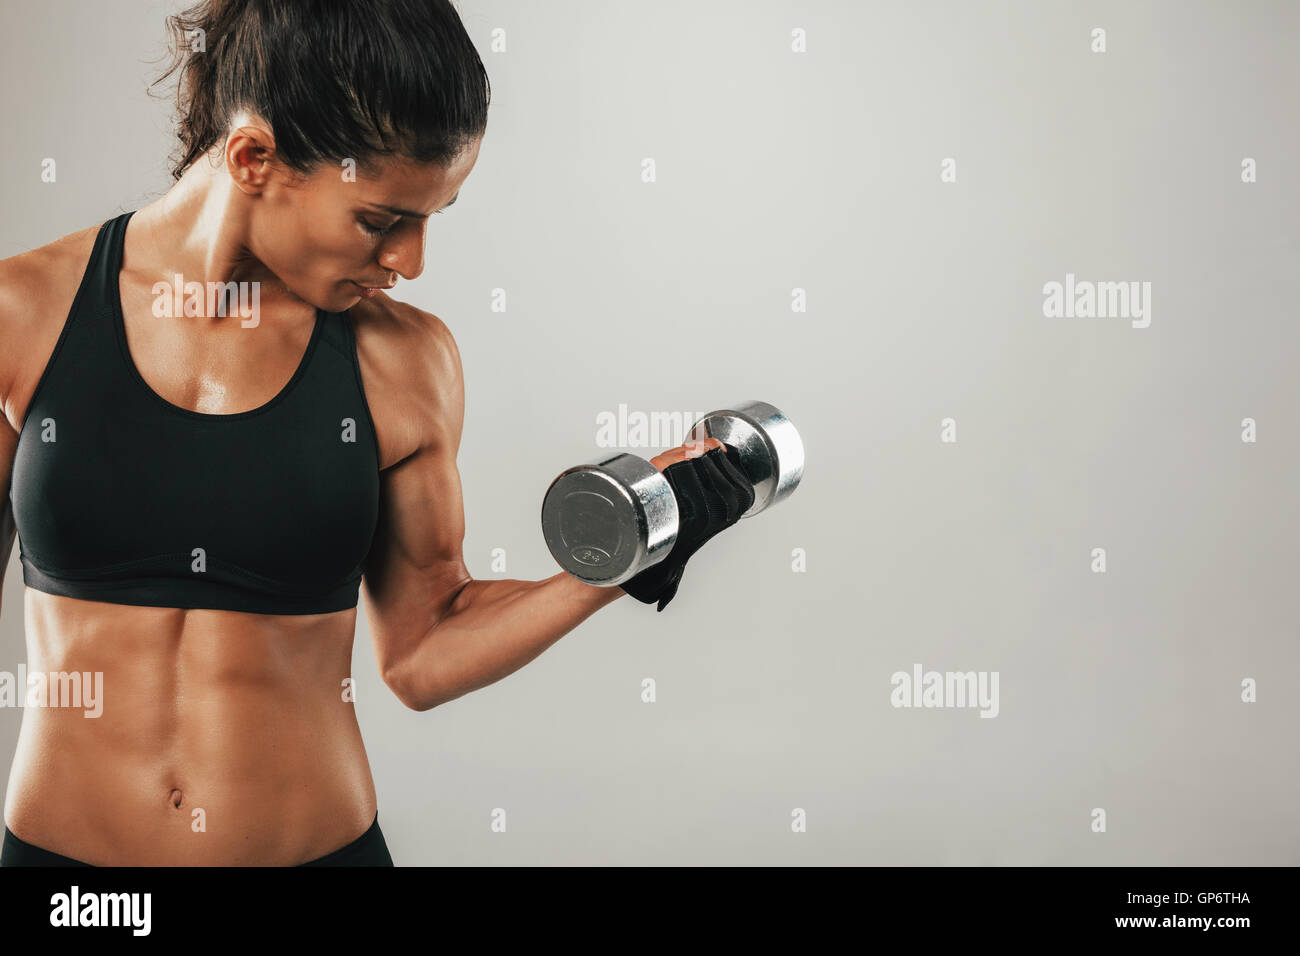 Cropped front view of woman in black shirt and weight training gloves lifting single chrome finish dumbbell with bicep muscles Stock Photo